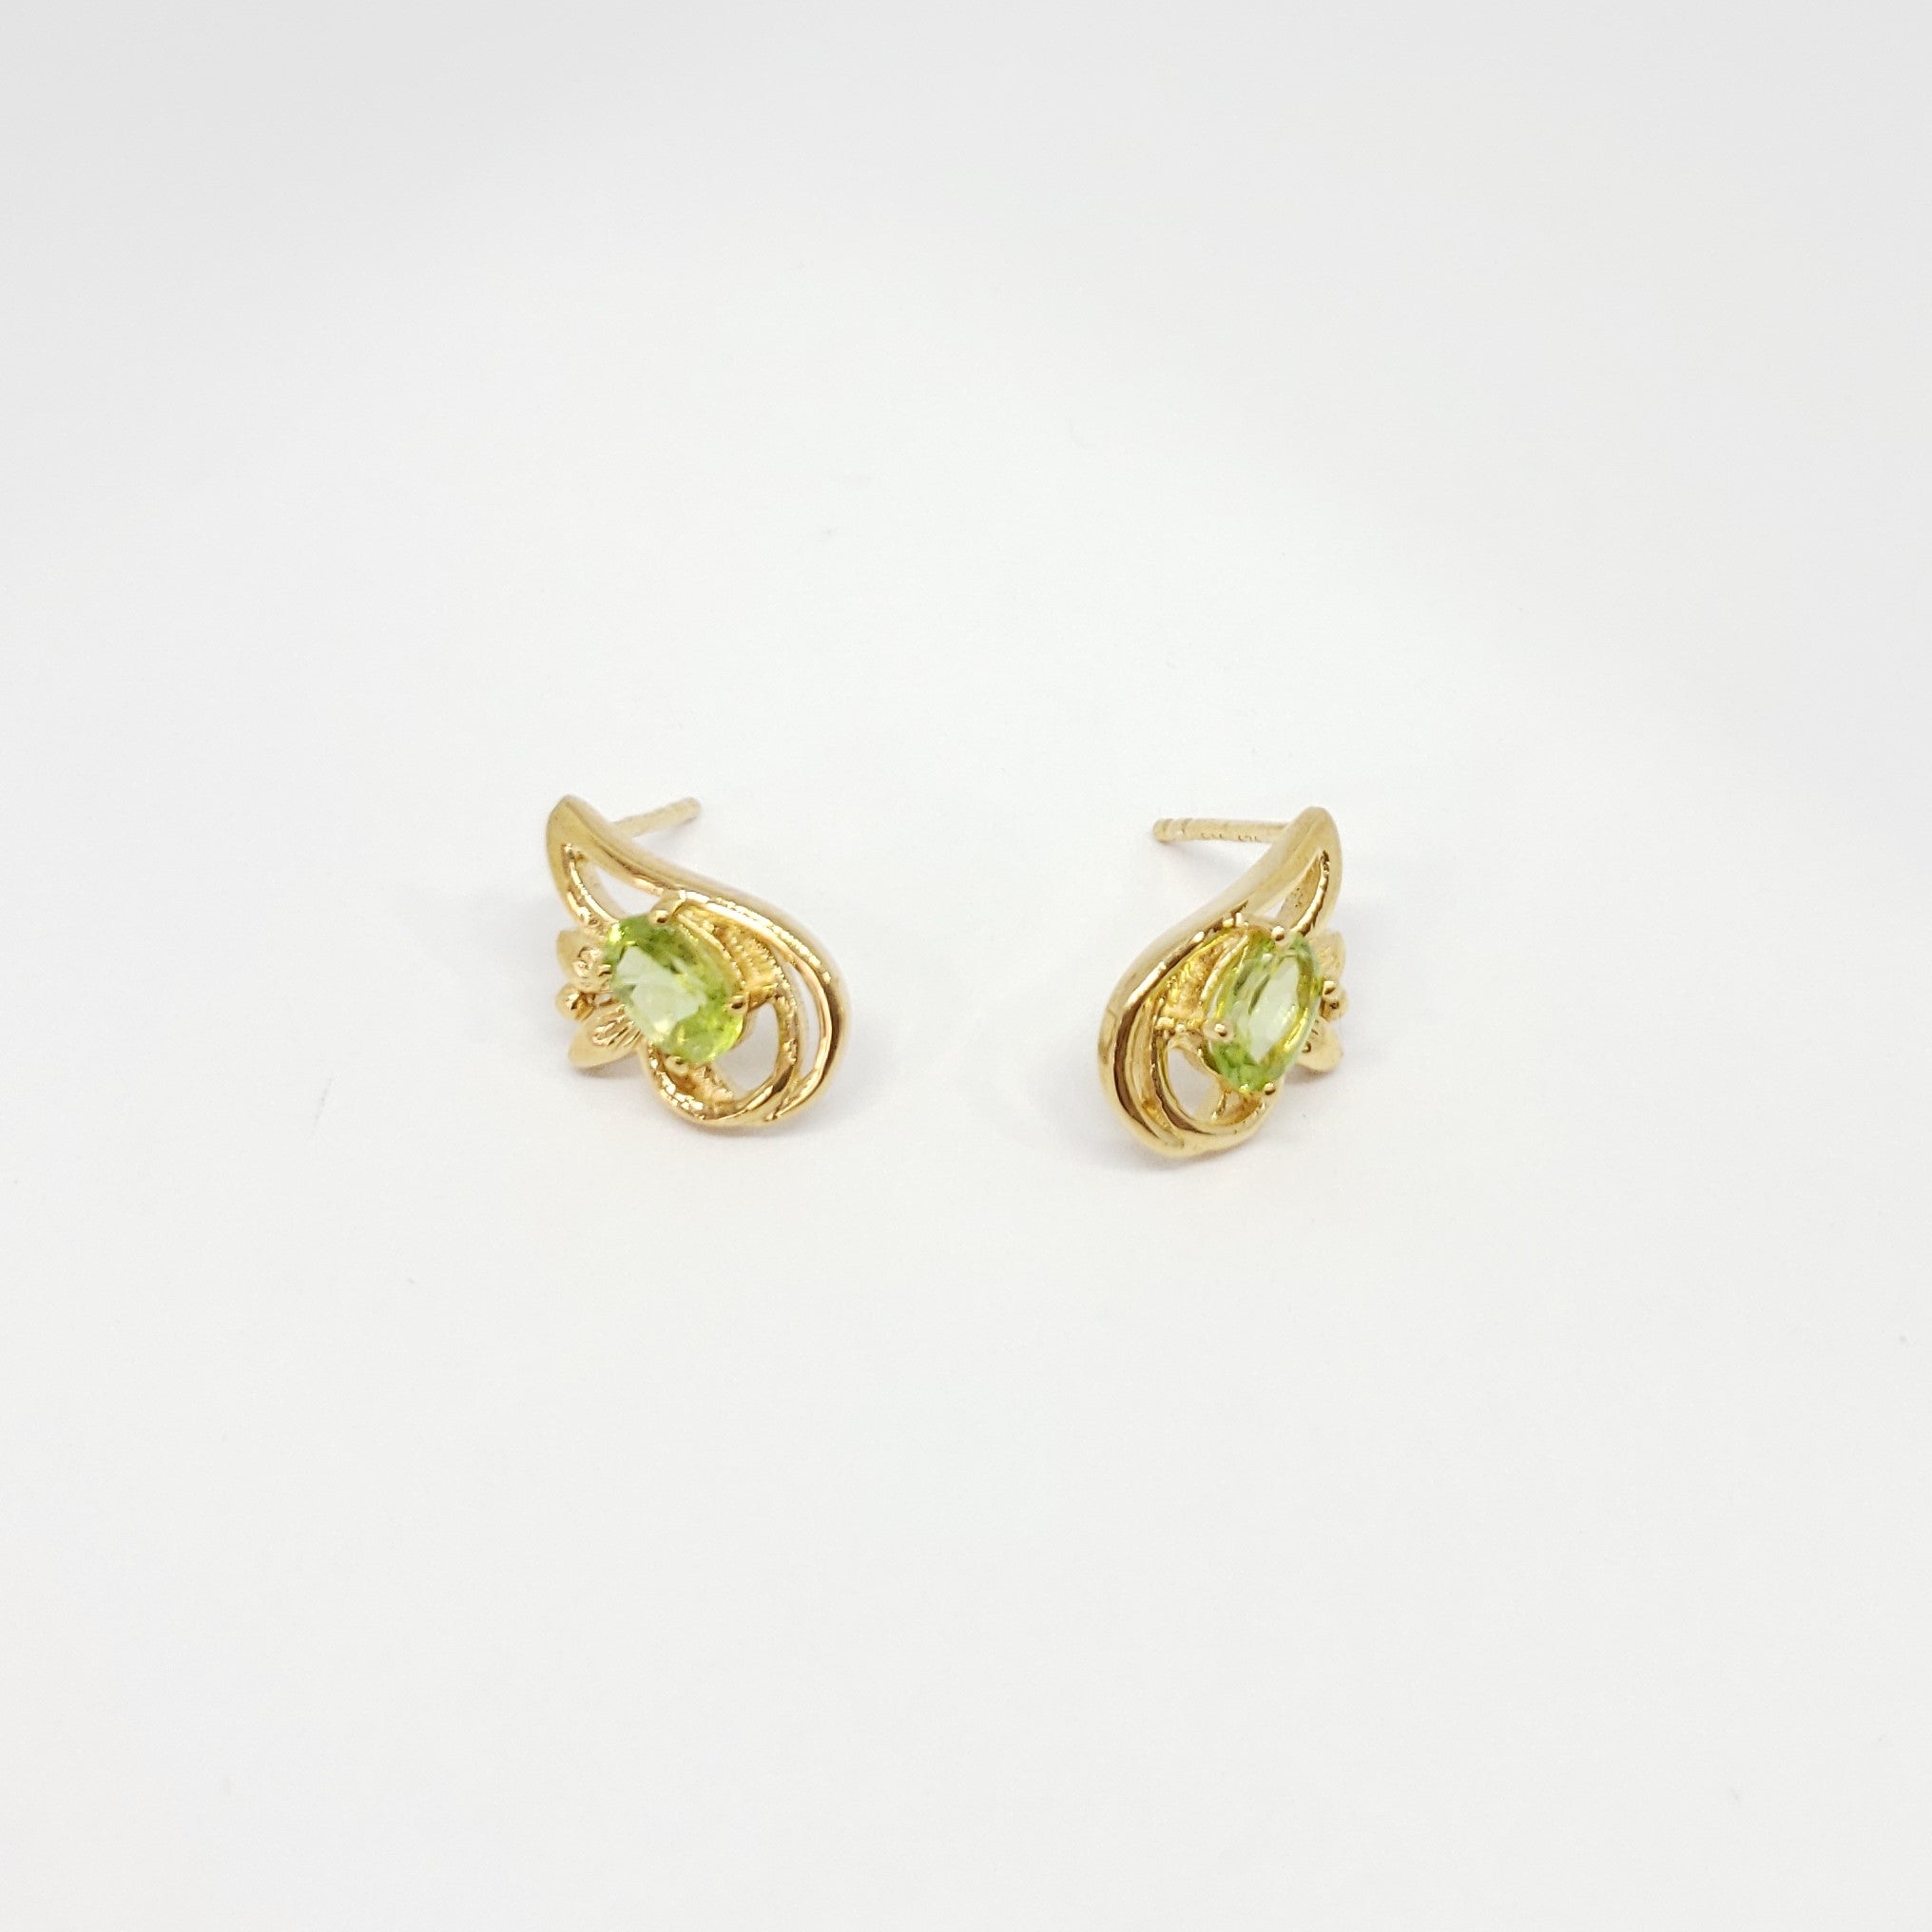 Hebei Peridot 14K YG Over Sterling Silver Earrings TGW 1.00 cts. - Houzz of DVA Boutique